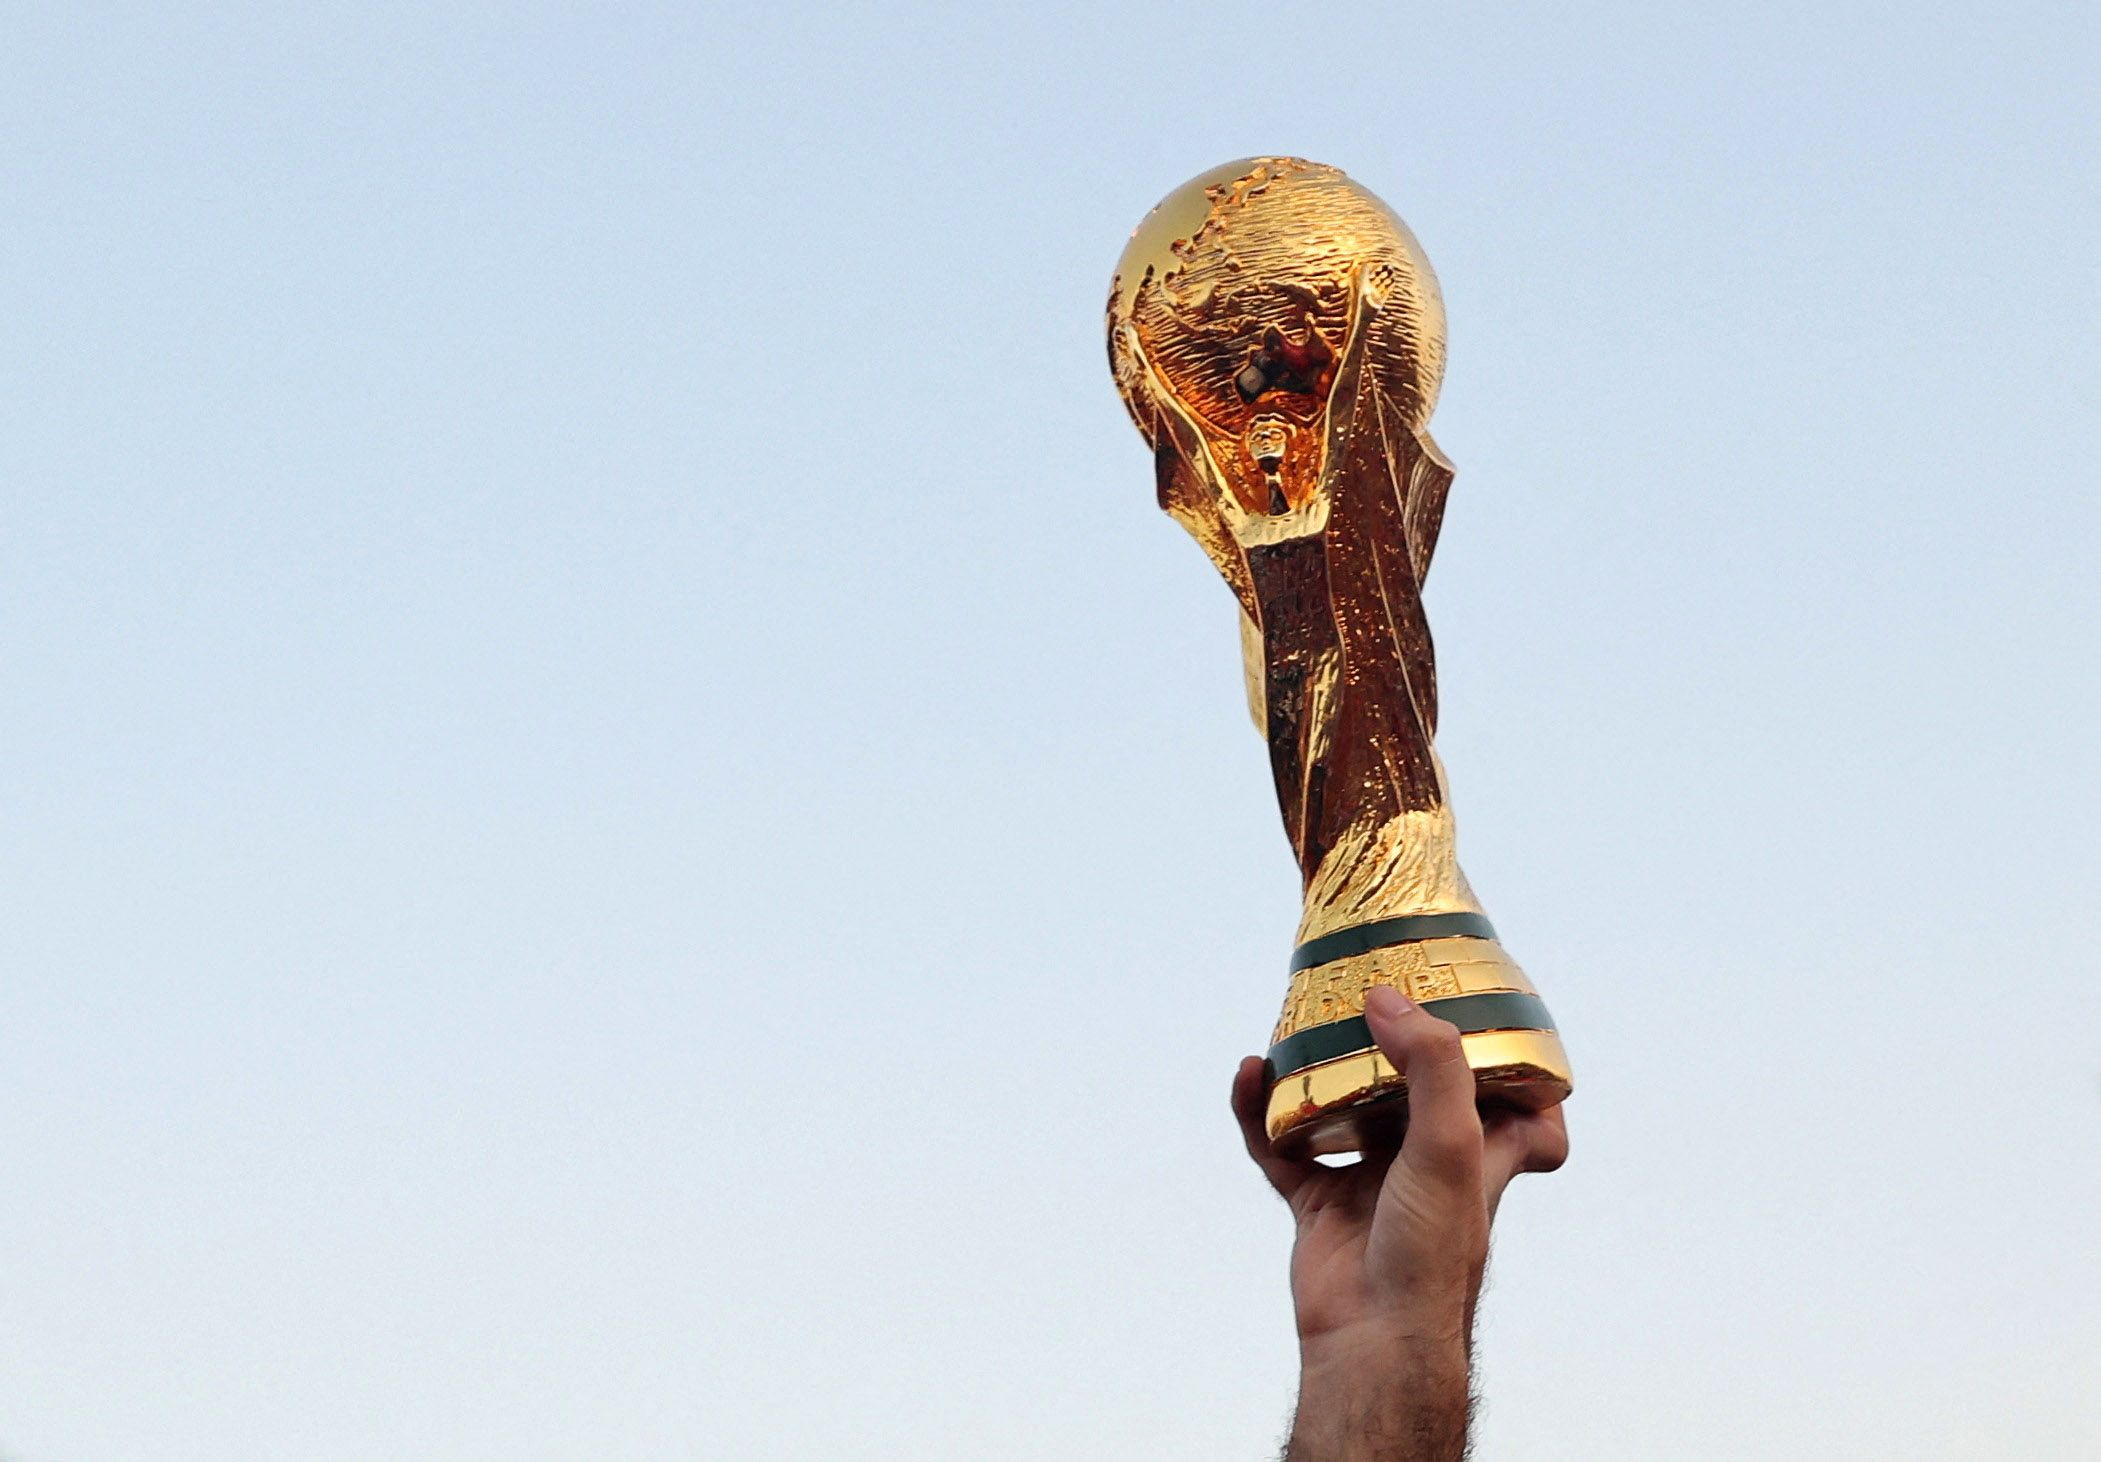 World Cup quiz: How well do you know Leeds’ World Cup history? -Leeds United